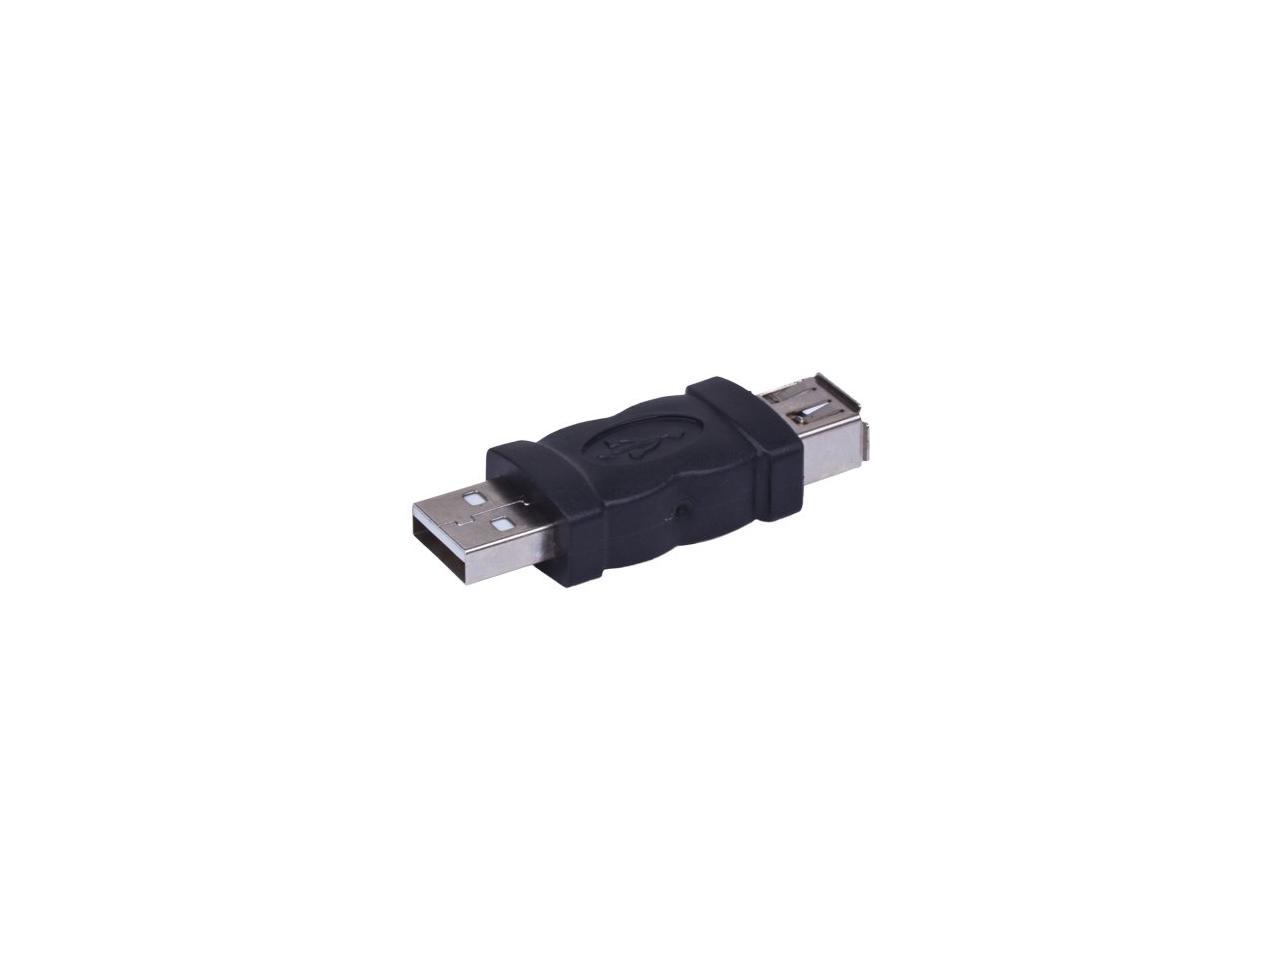 usb male to firewire ieee 1394 6 pin female adapter